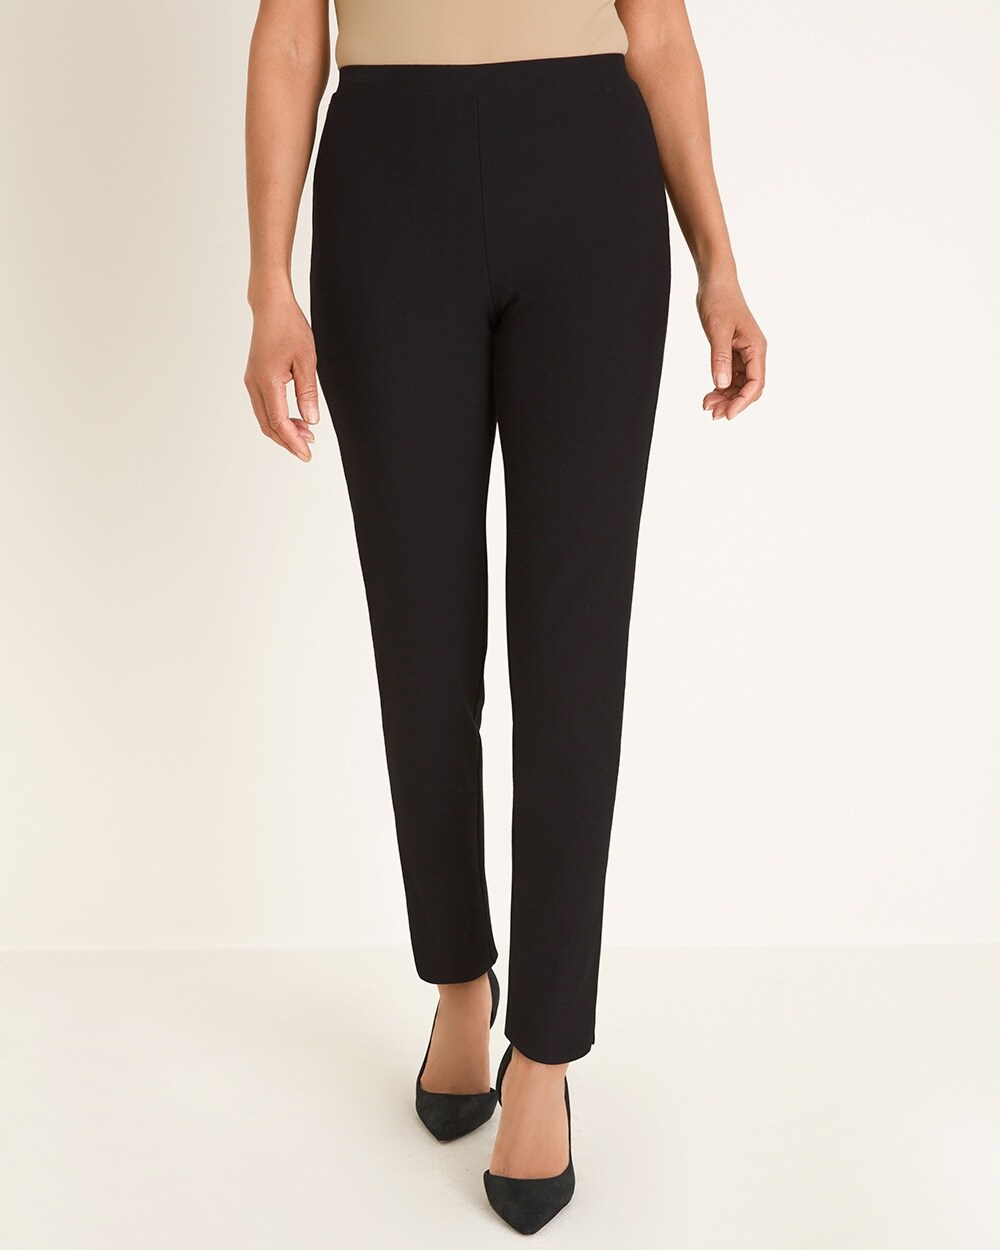 Marla Wynne for Chico's Crepe Fitted Ankle Pants